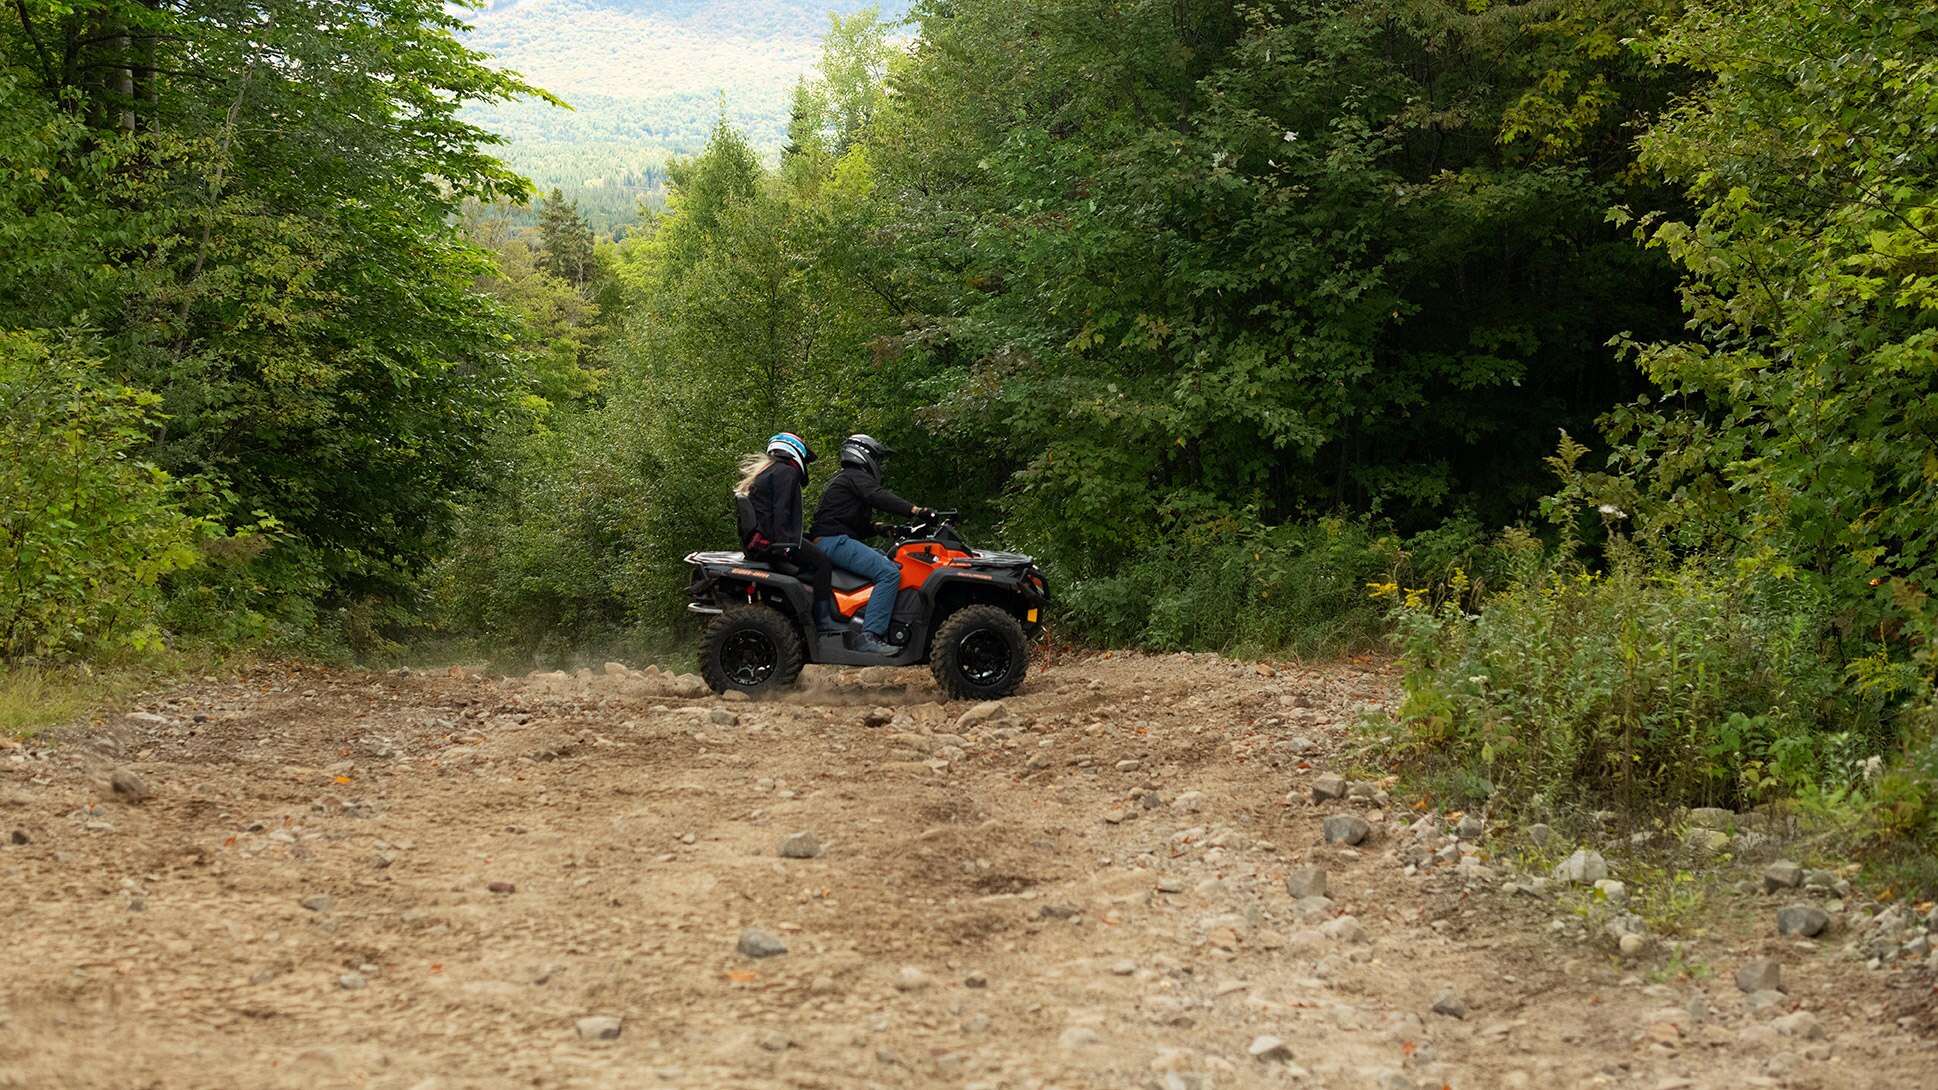 A couple on an ATV in the forest